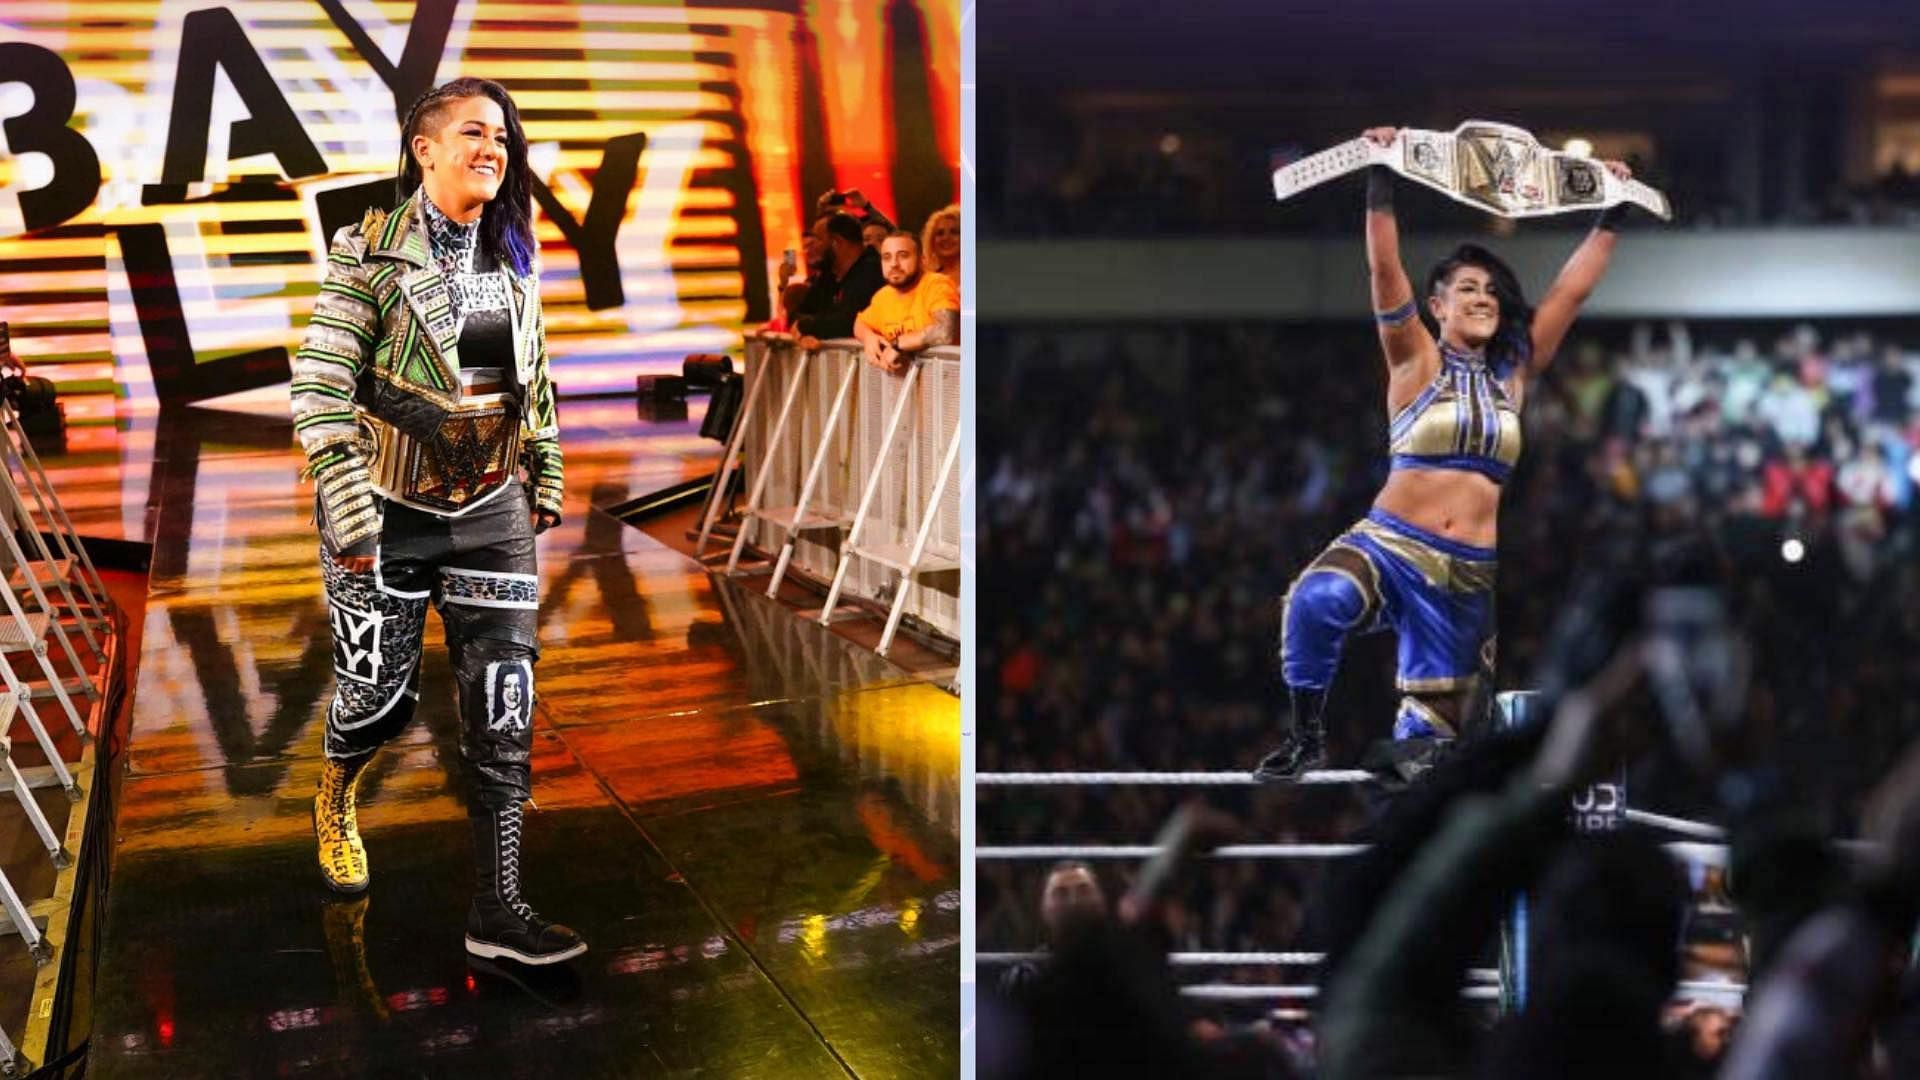 Bayley may defend the WWE Women